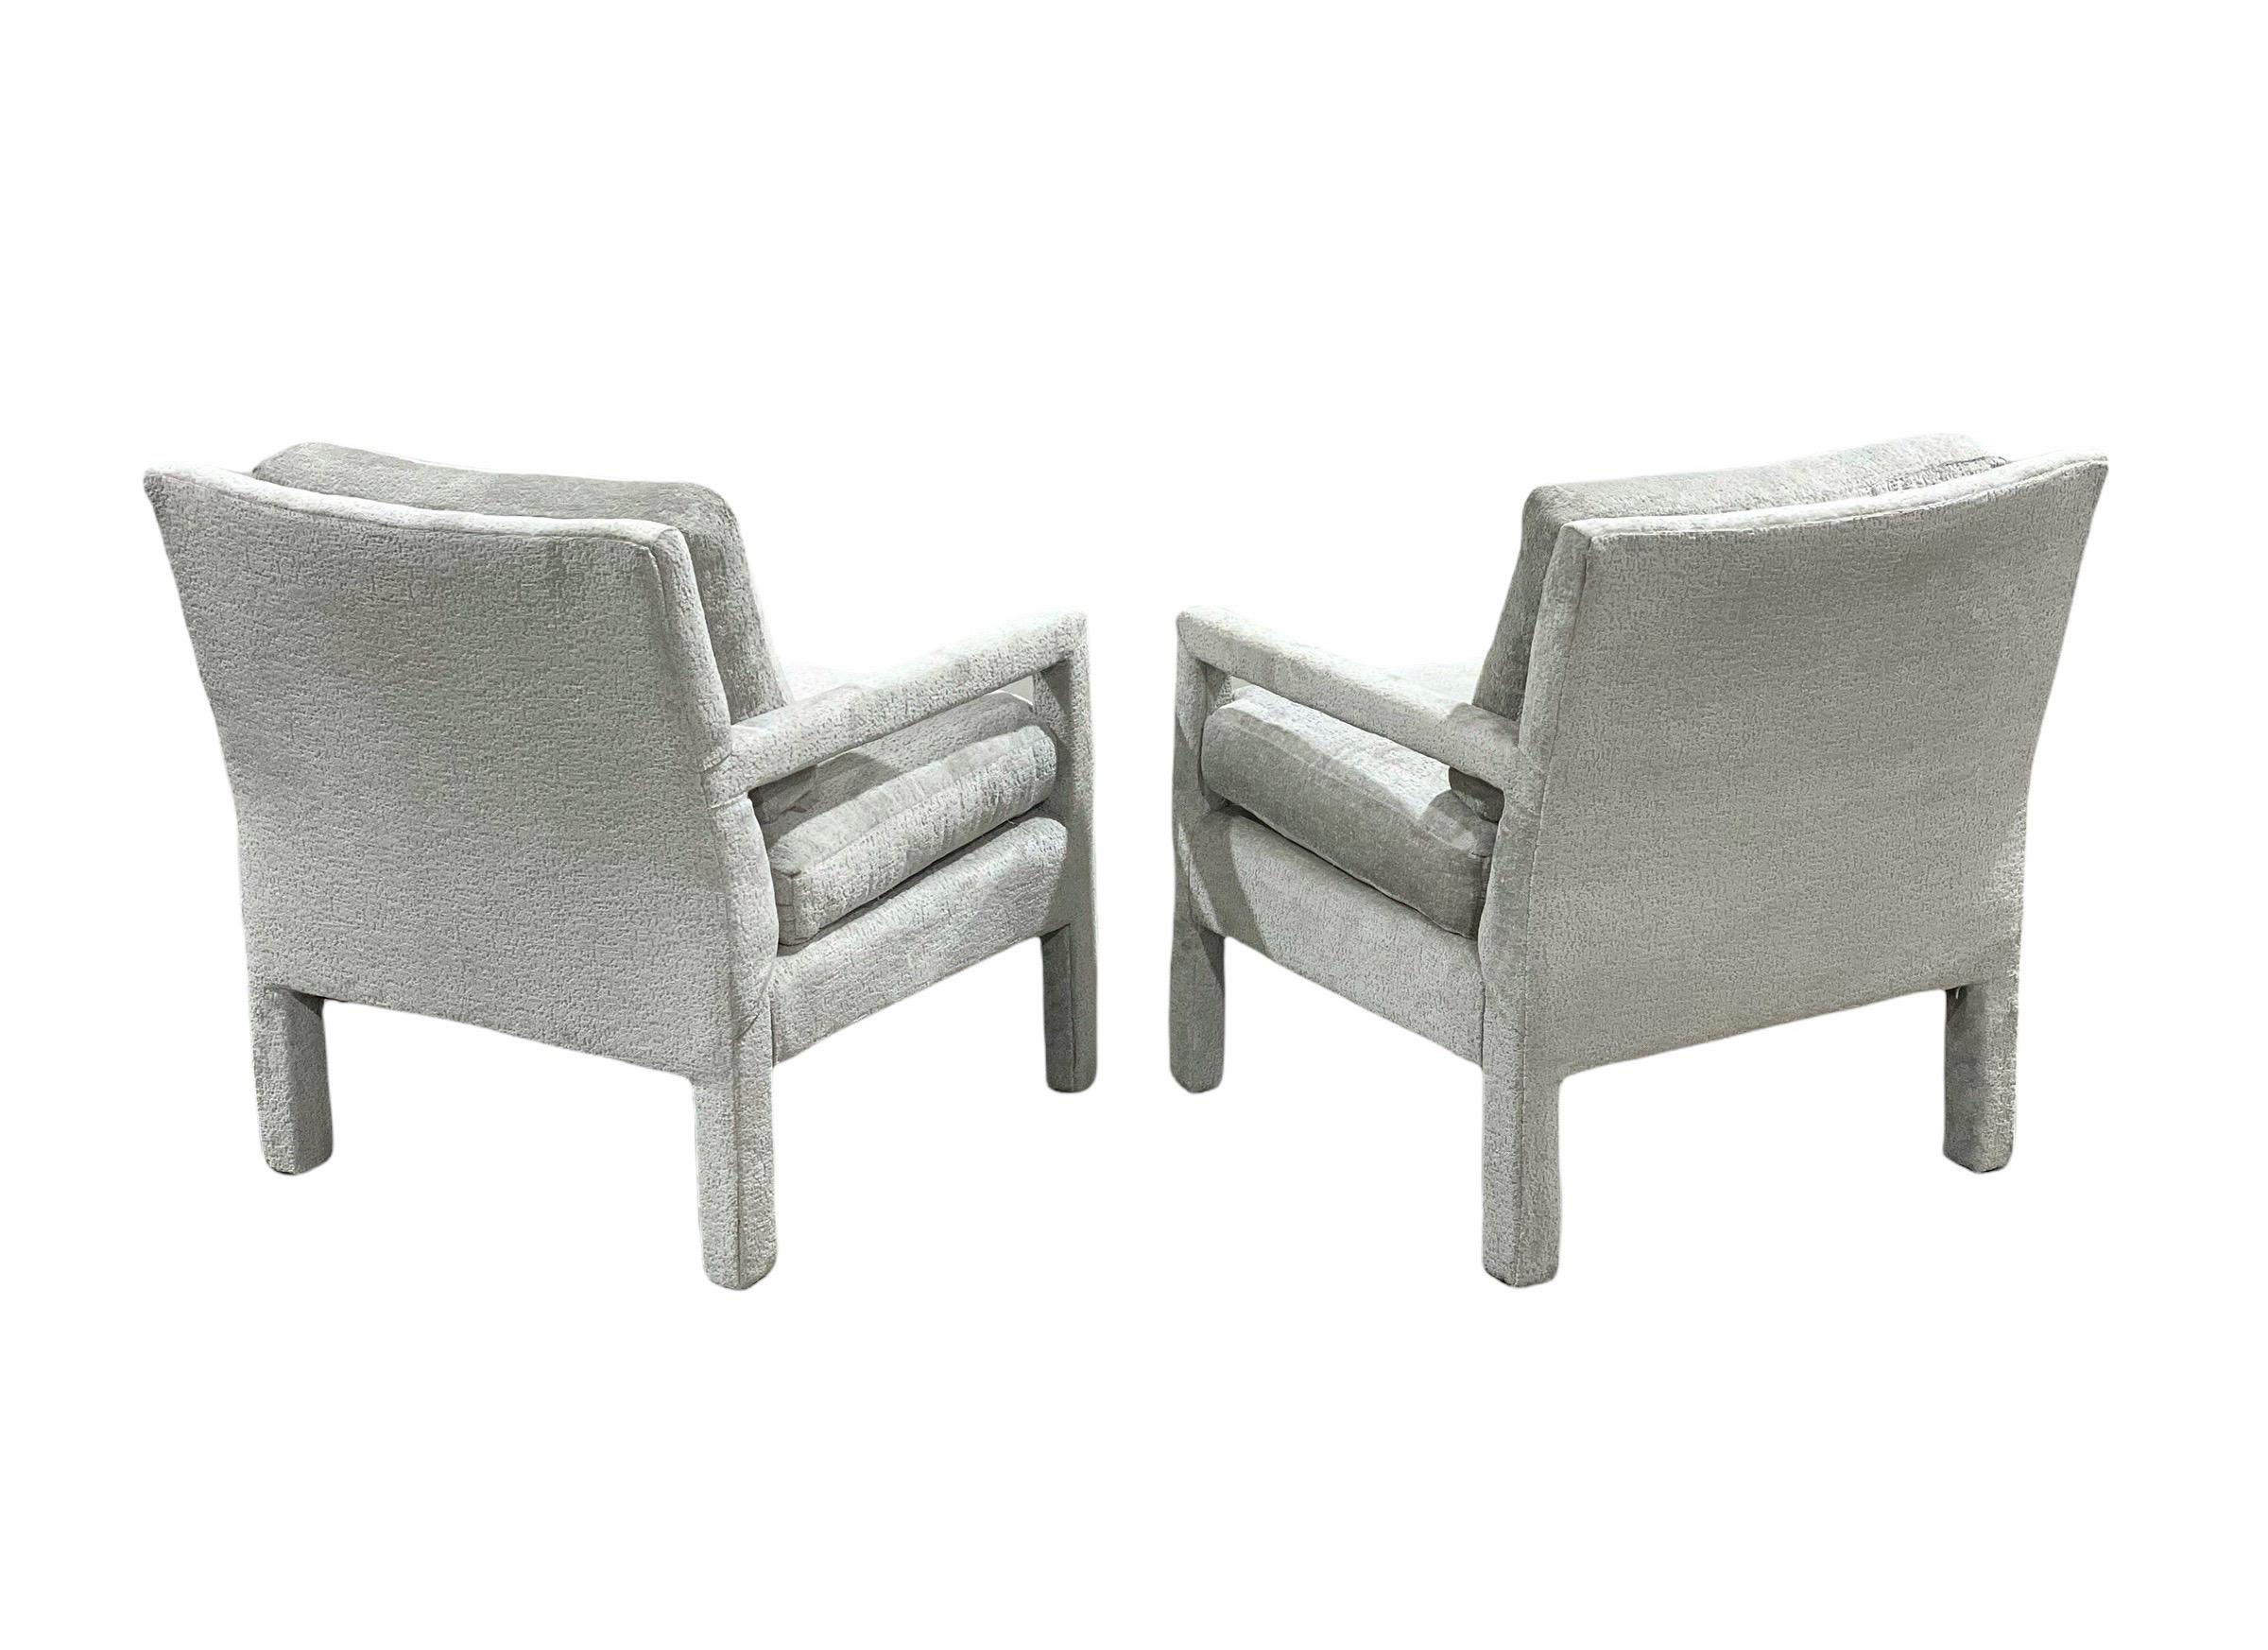 Late 20th Century Pair Midcentury Parsons Style Lounge Chairs by Bernhardt, After Milo Baughman For Sale